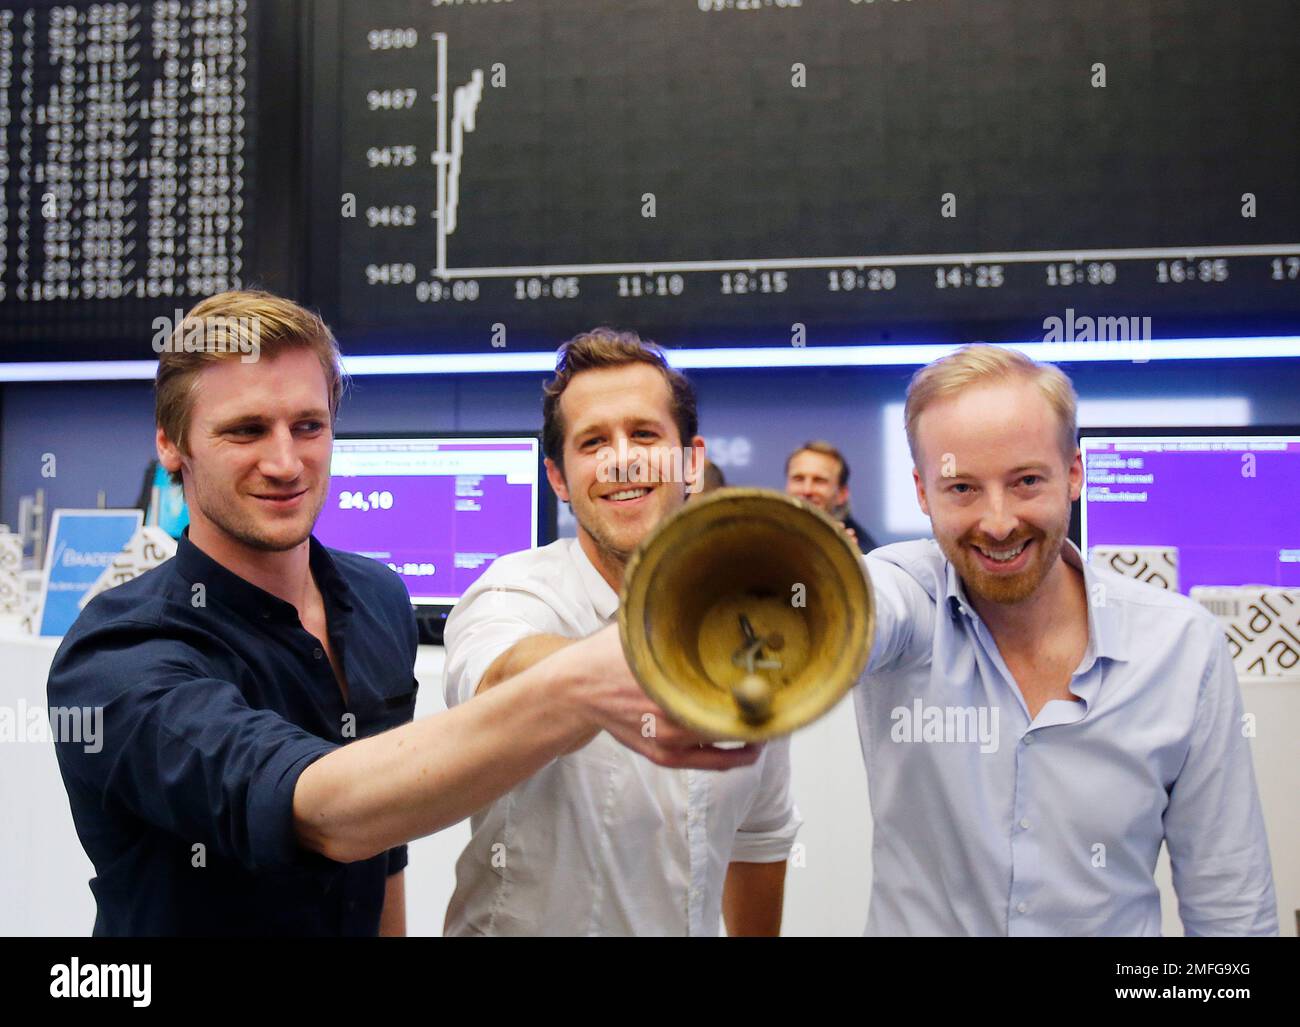 FILE - In this Jan. 10, 2014 file photo, the three CEOs of German online  warehouse Zalando, David Schneider, Robert Gentz and Rubin Ritter, from  left, ring the bell during the company's